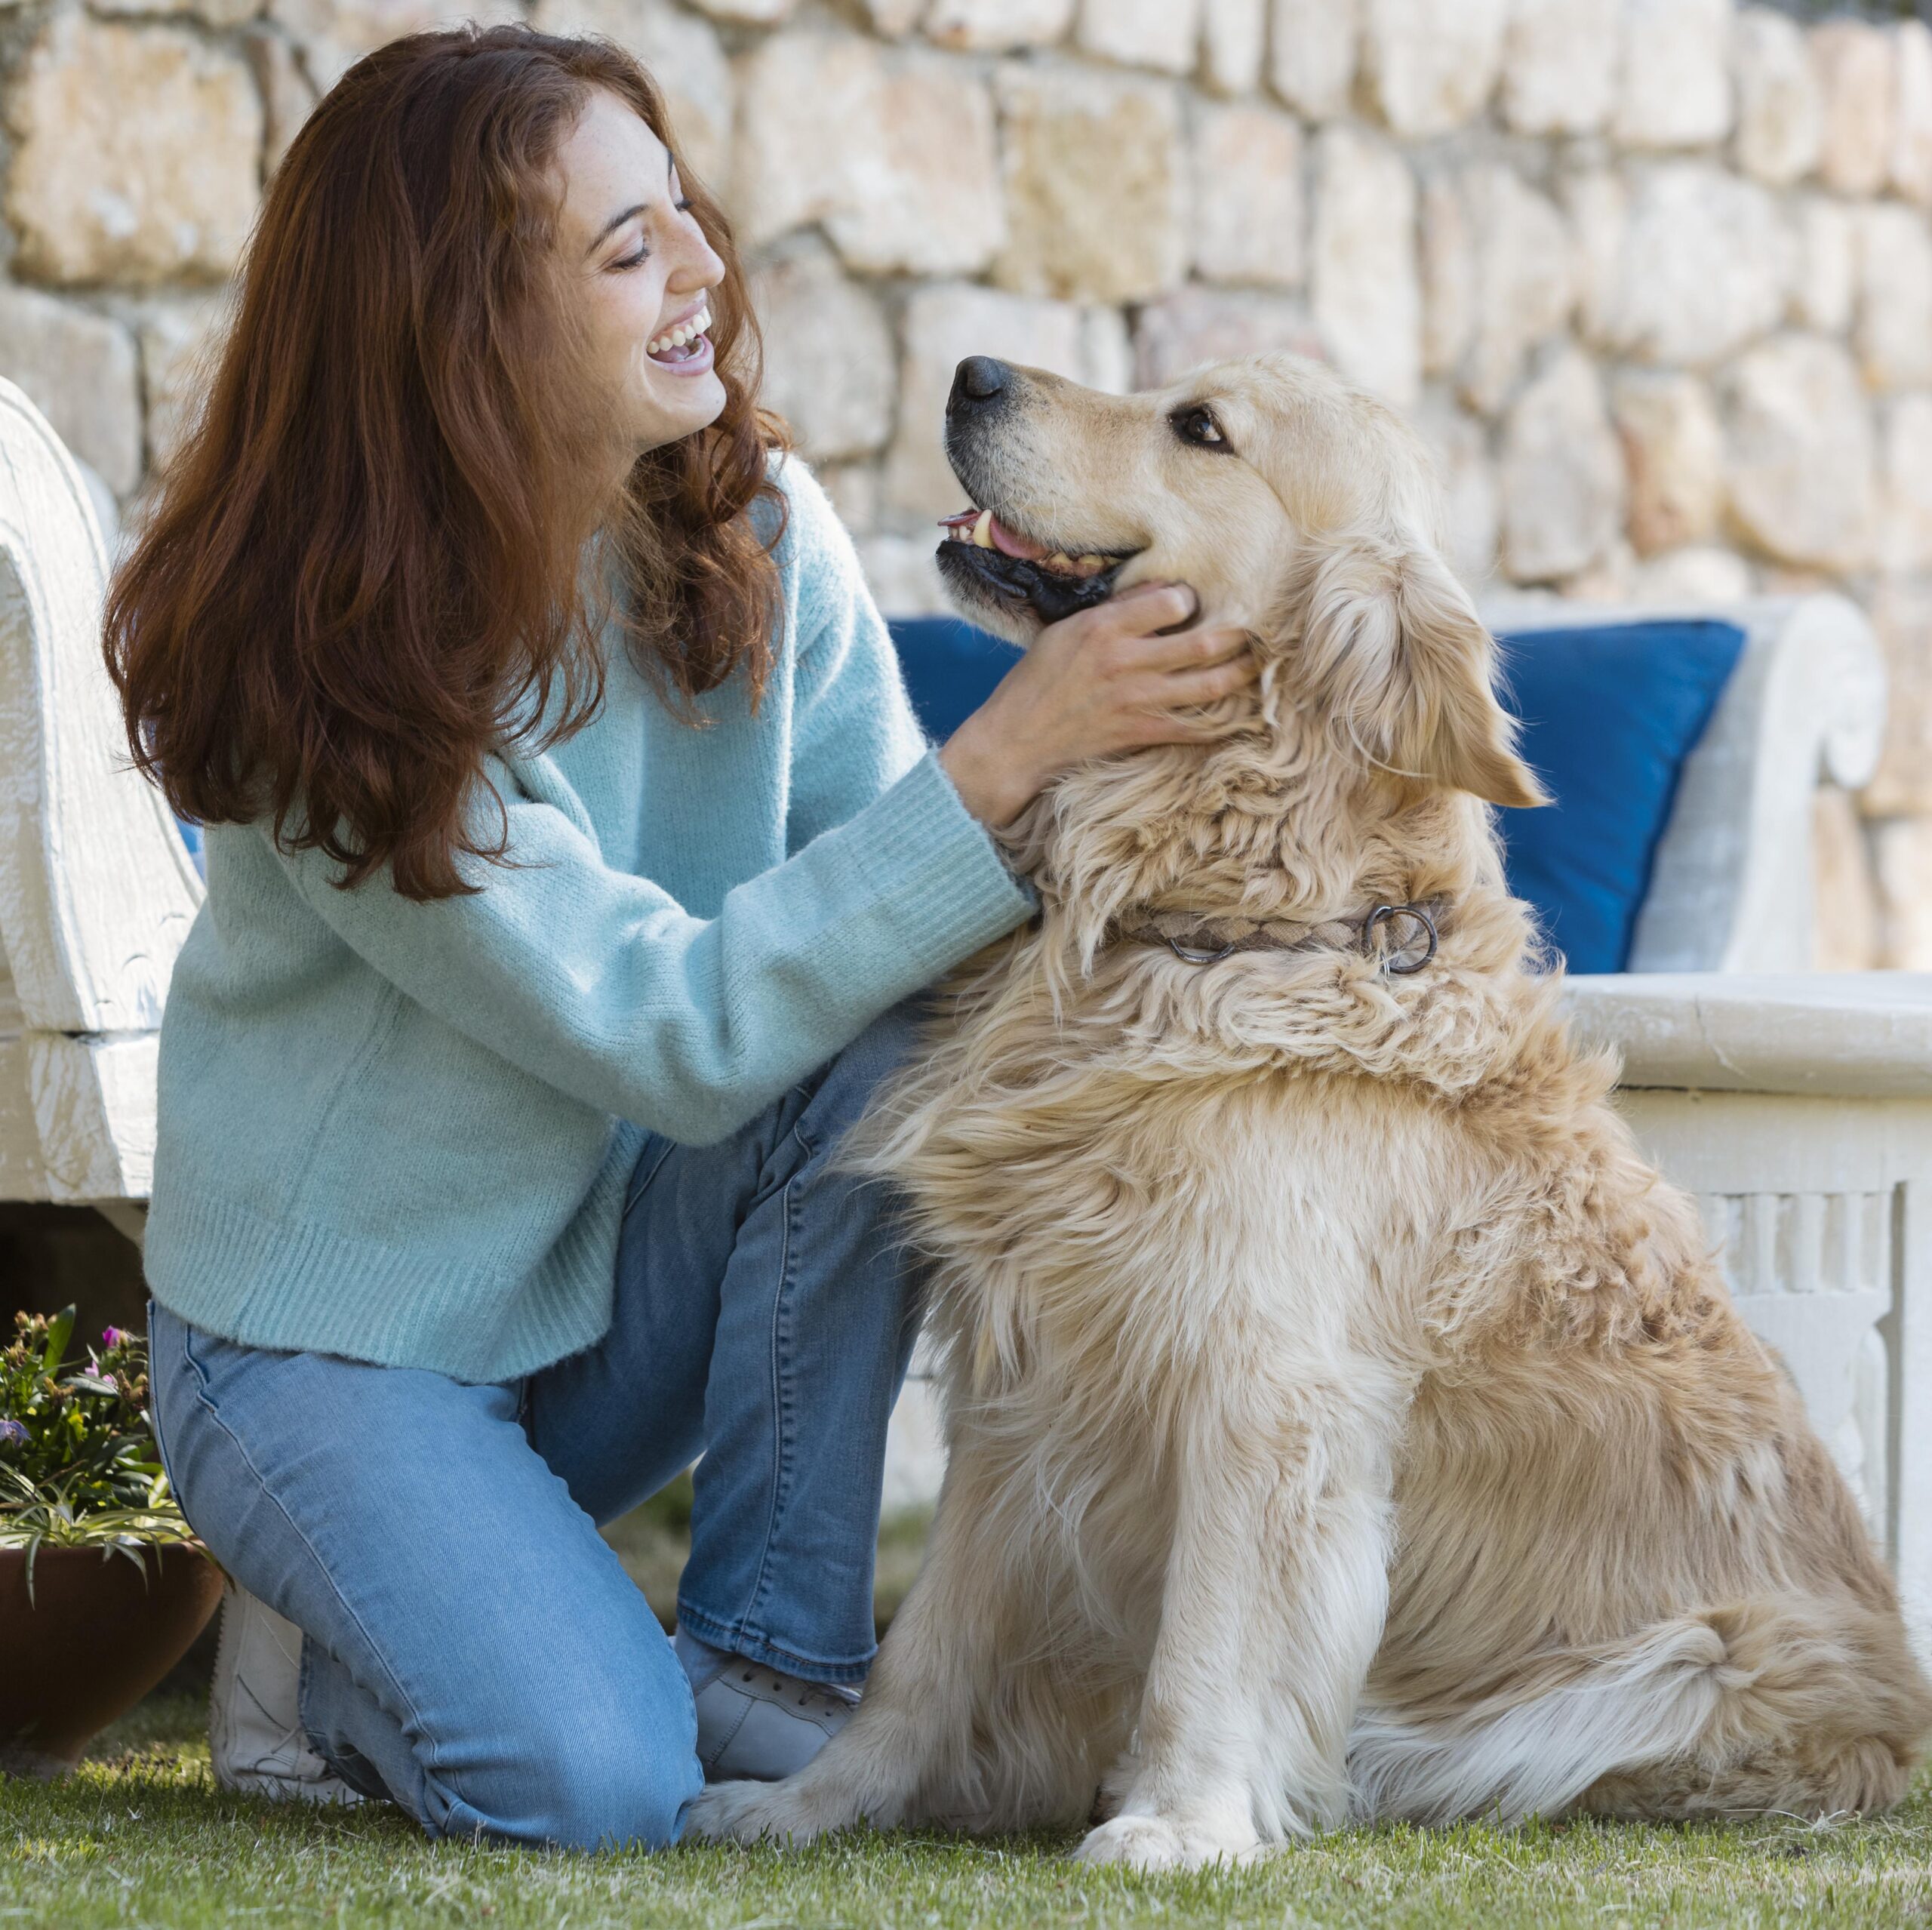 Elevating the Well-being of Your Furry Friend